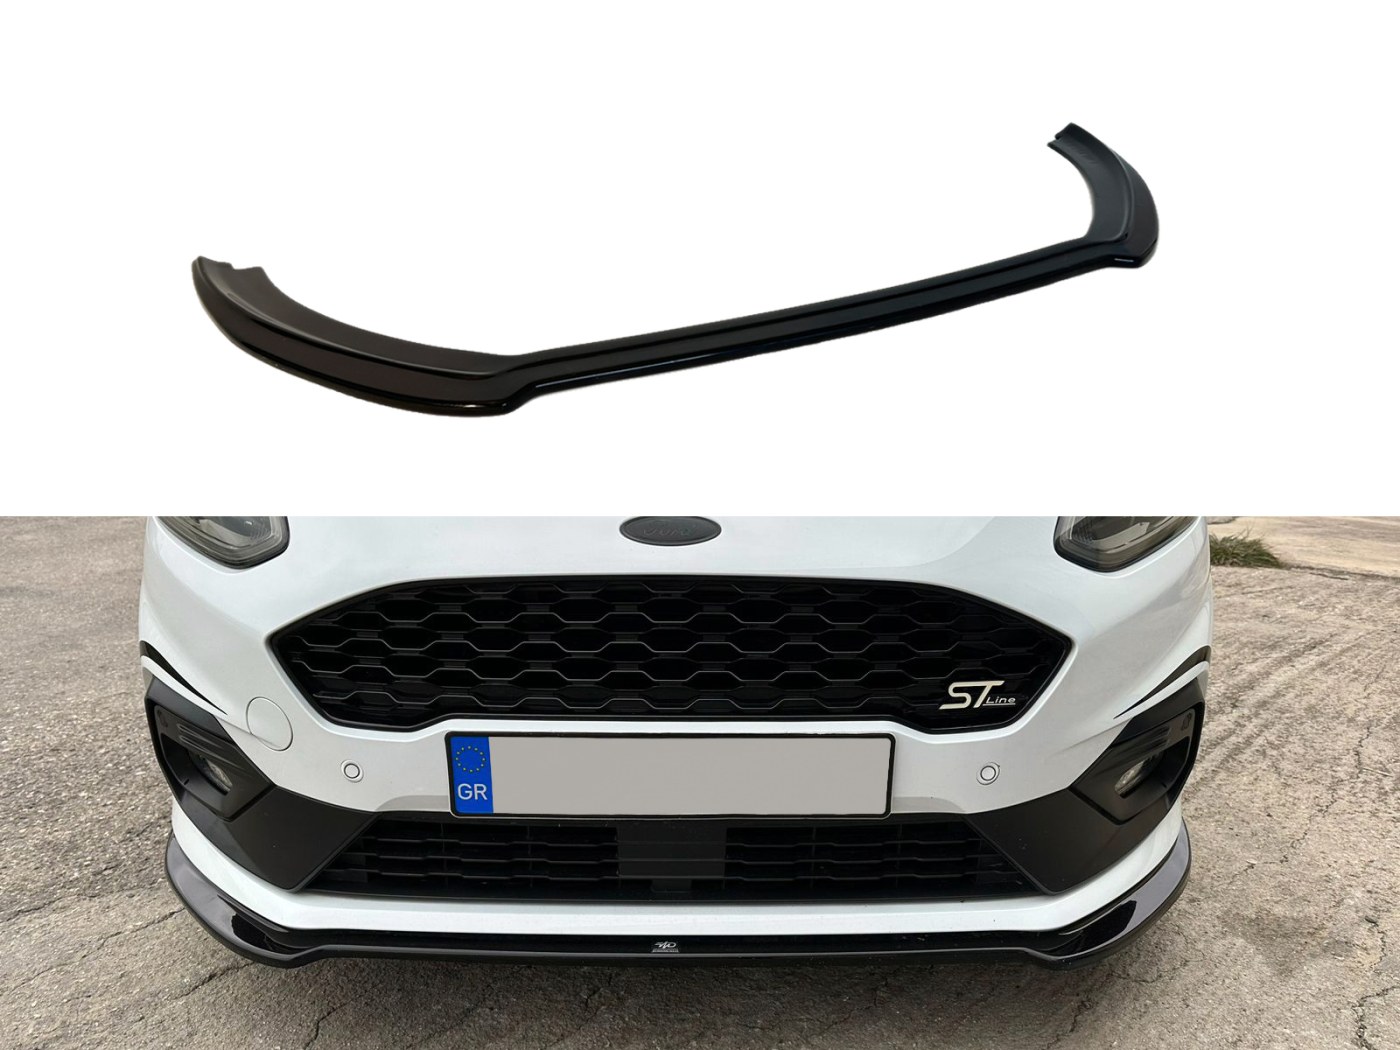 Ford Fiesta Mk8 / Active ST - 1.5T Ecoboost stage 1 - BR-Performance  Luxembourg - Professional chiptuning